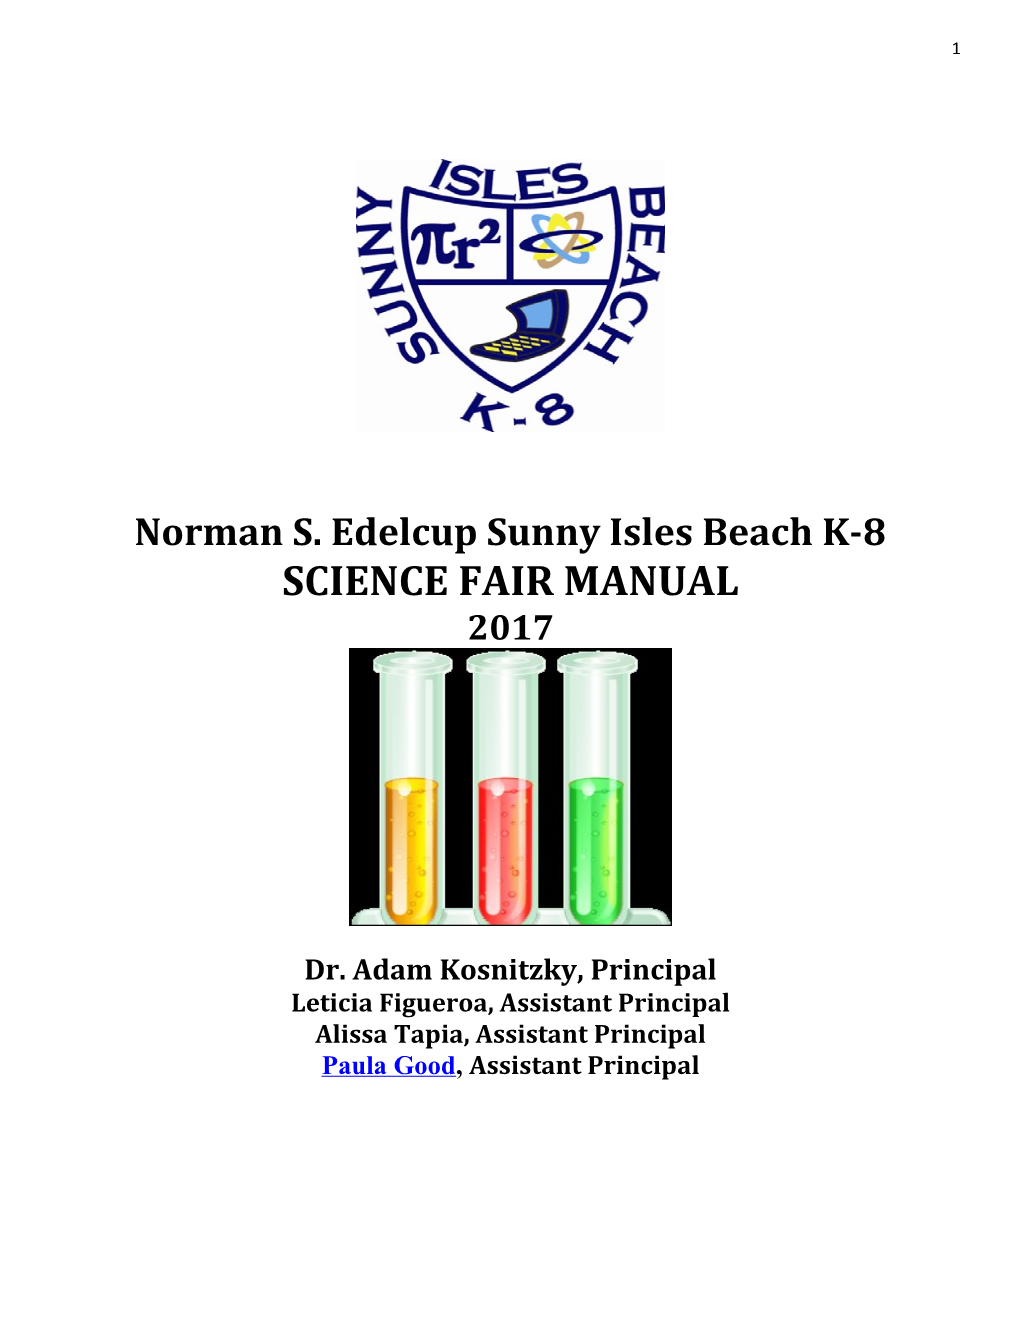 Norman S. Edelcup Sunny Isles Beach K-8